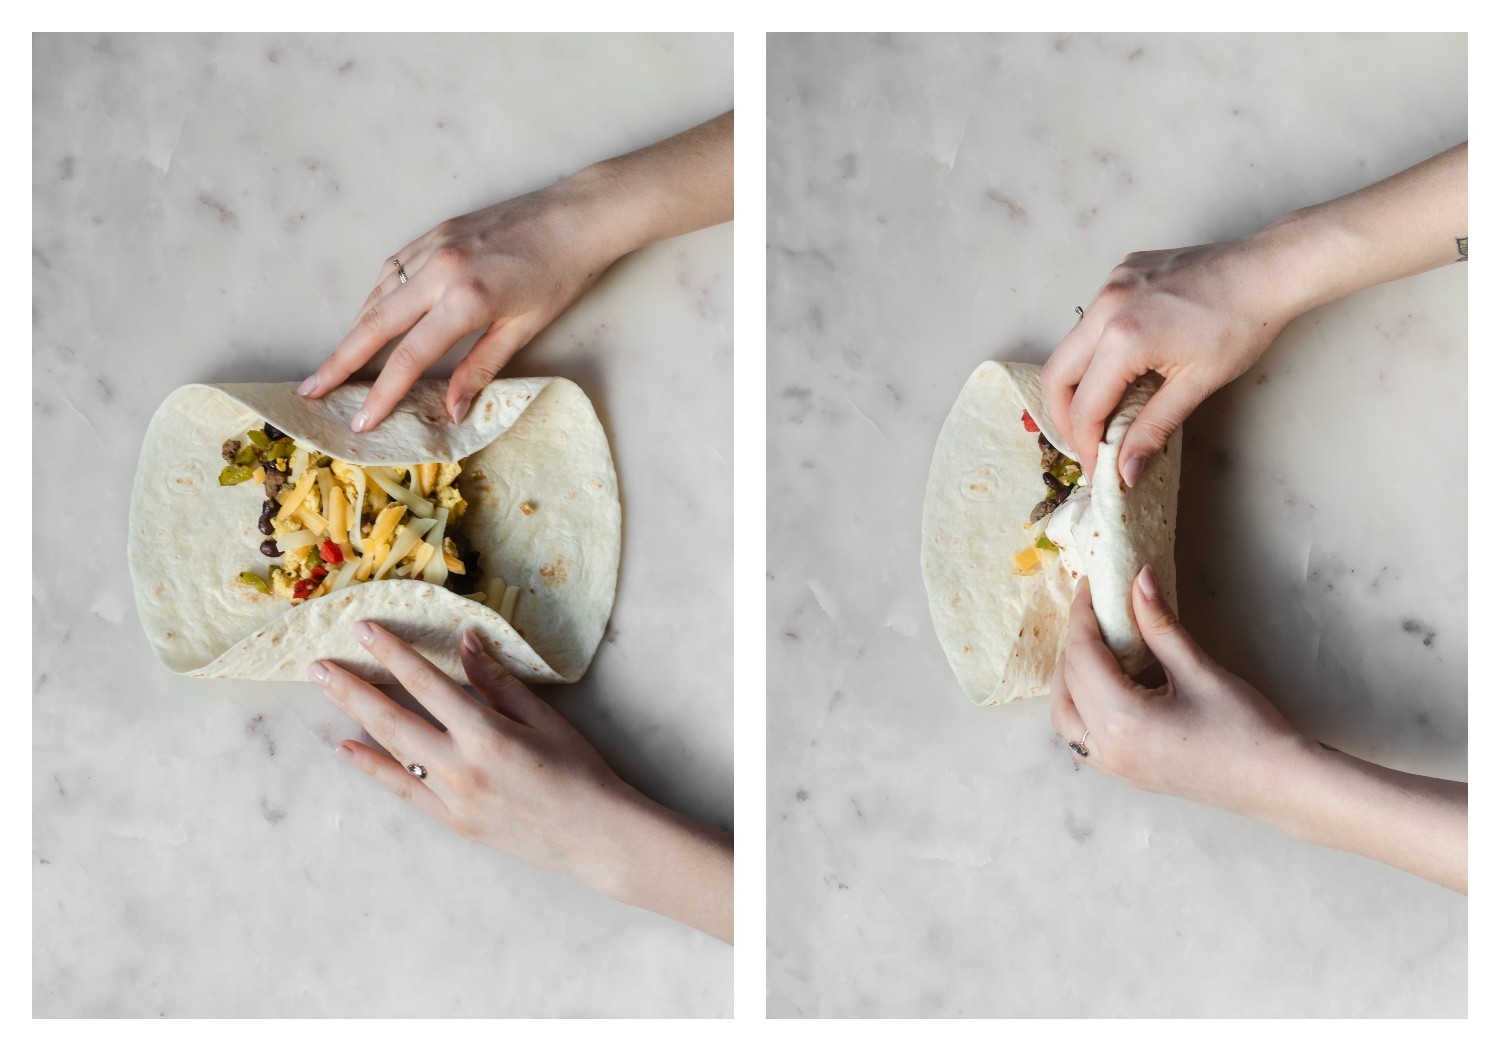 A bird's eye shot of a woman's hands rolling a burrito on a marble backdrop.